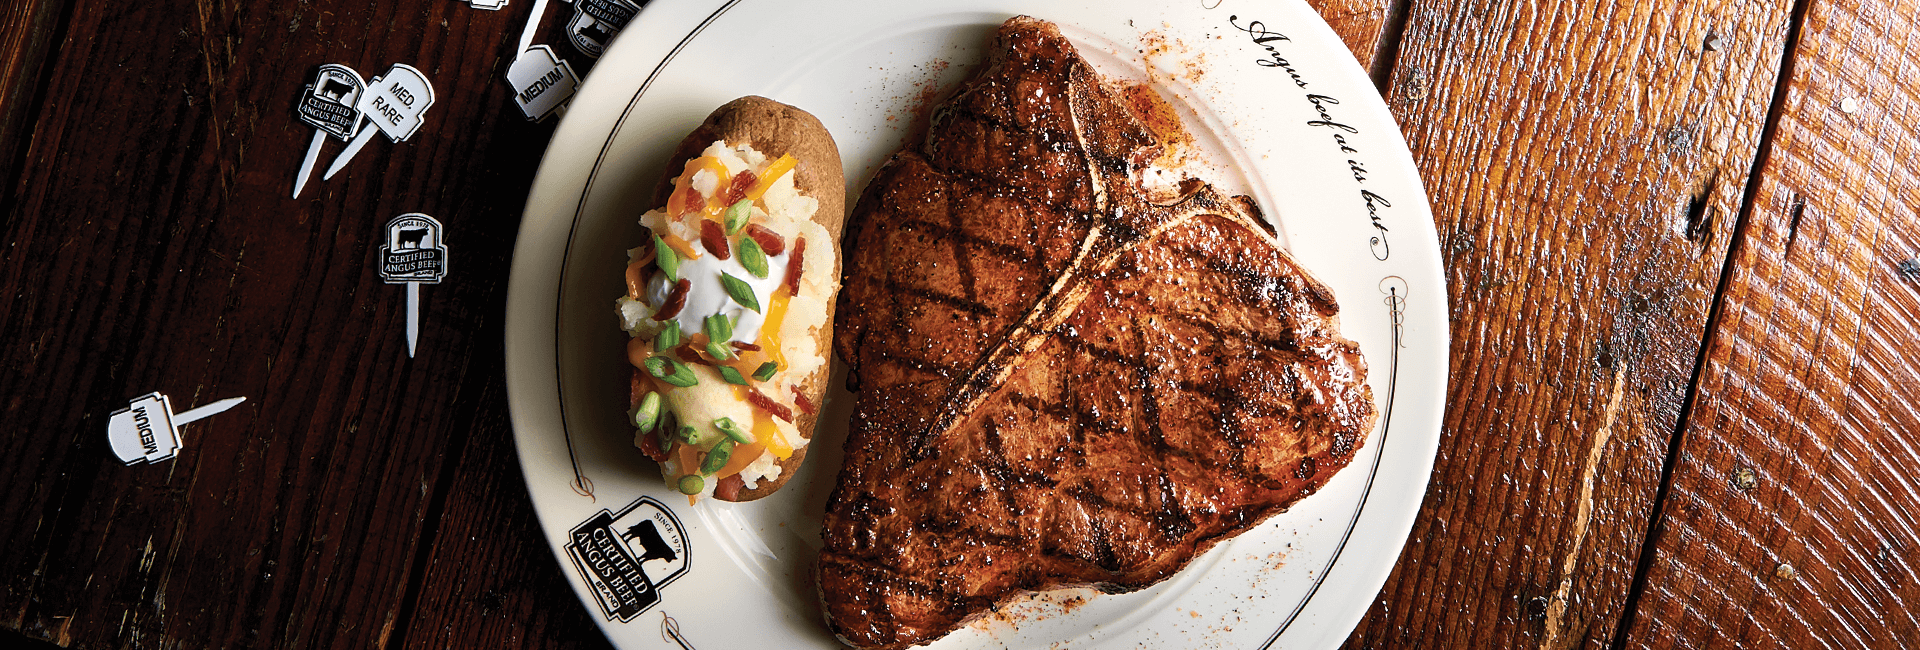 T-bone steak - Grilled To Perfection! - The Anthony Kitchen